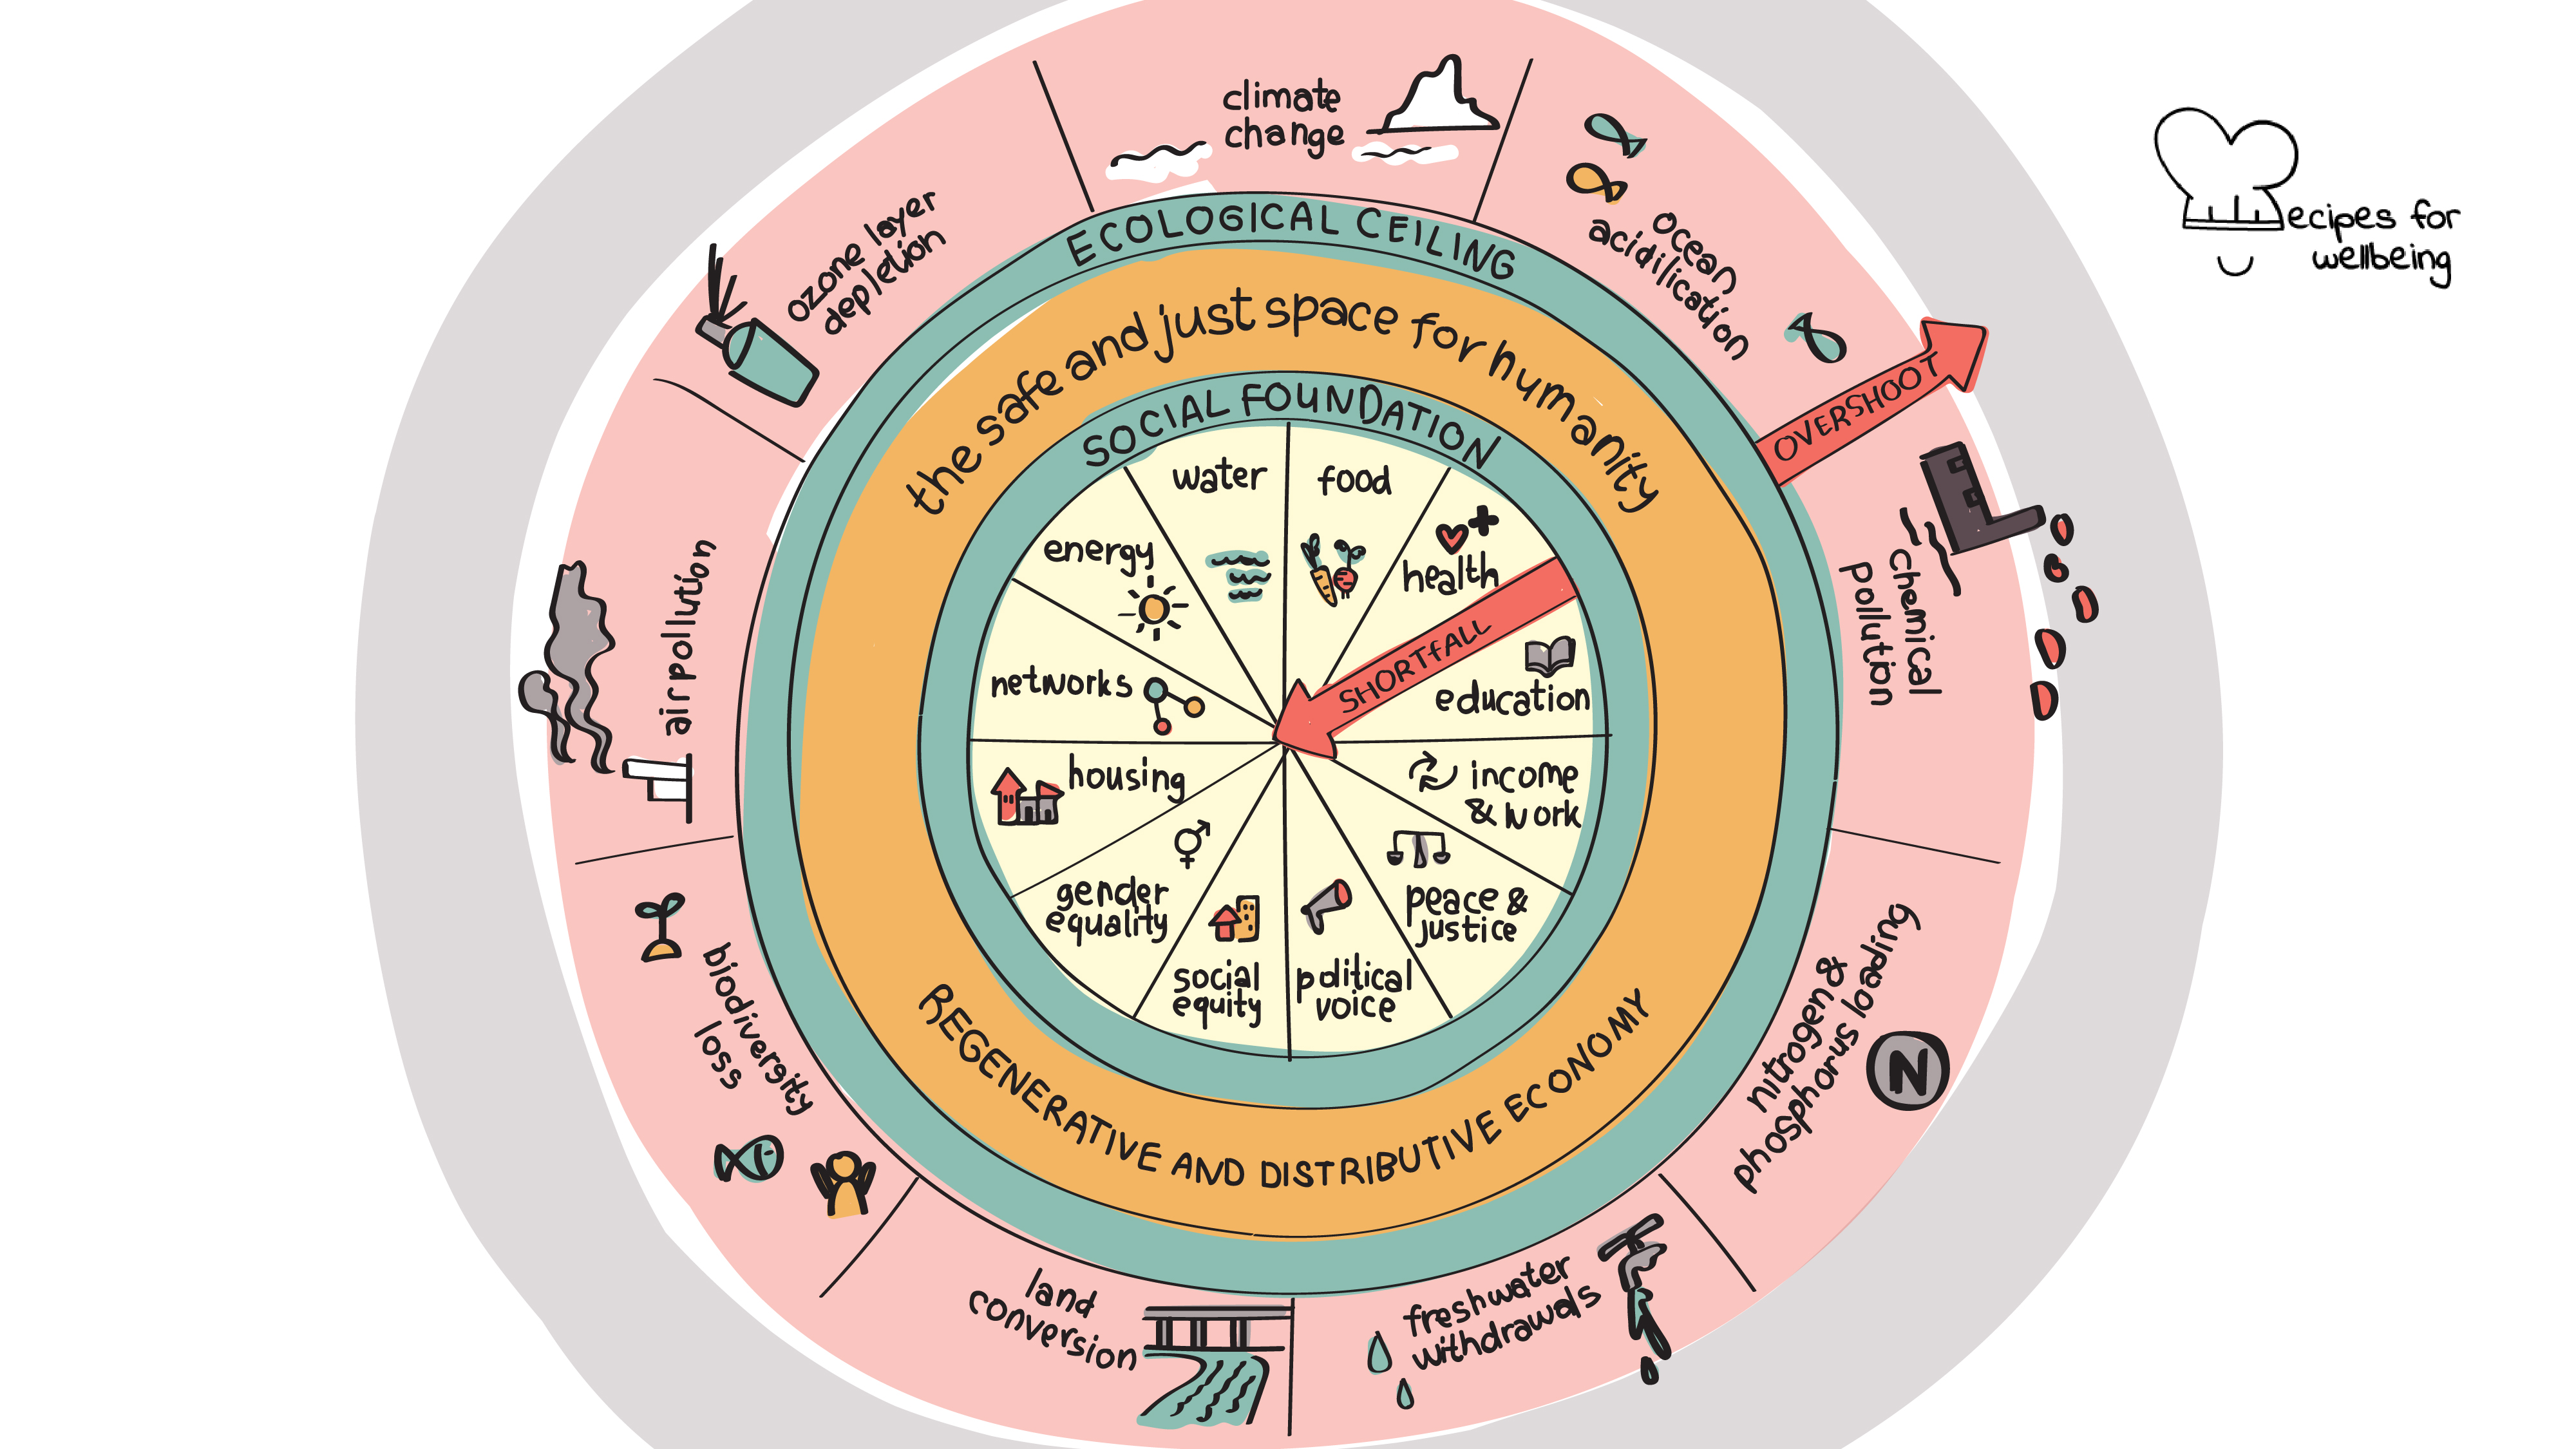 Illustration of the visual framework "Doughnut Economy". © Recipes for Wellbeing